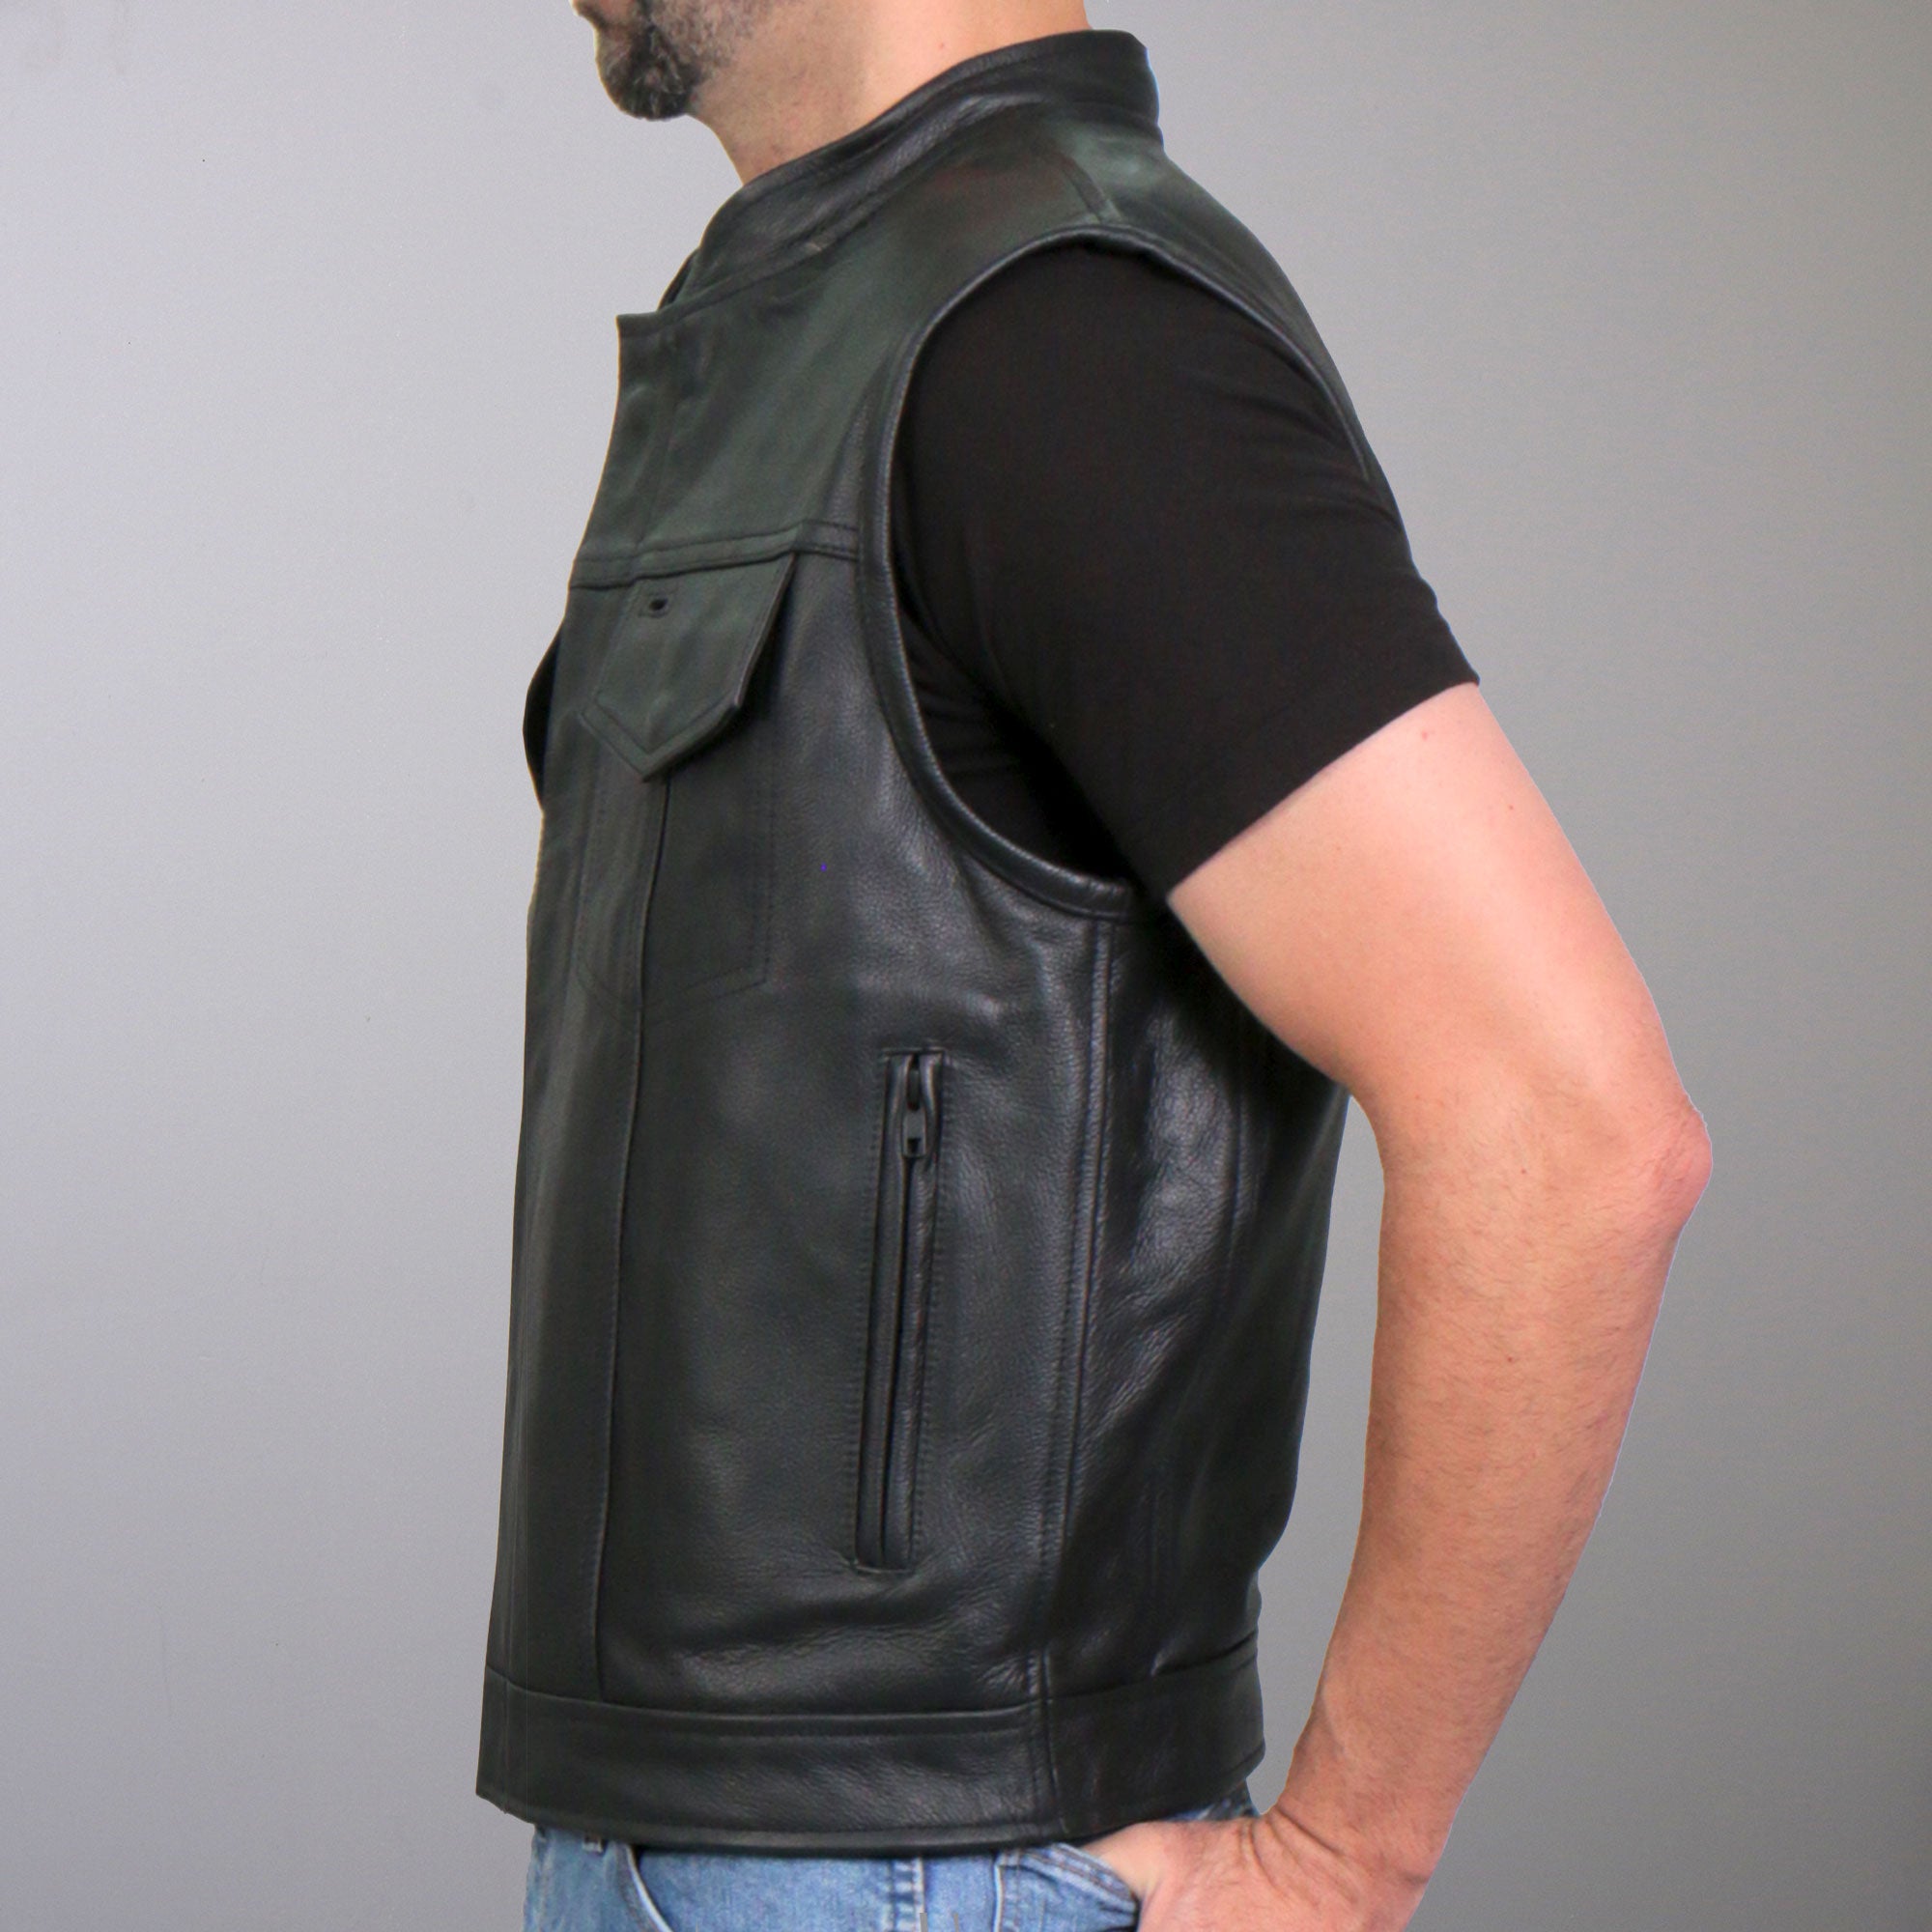 Hot Leathers VSM1050 Men’s Black 'Paisley Green' Motorcycle Club style Conceal and Carry Leather Biker Vest